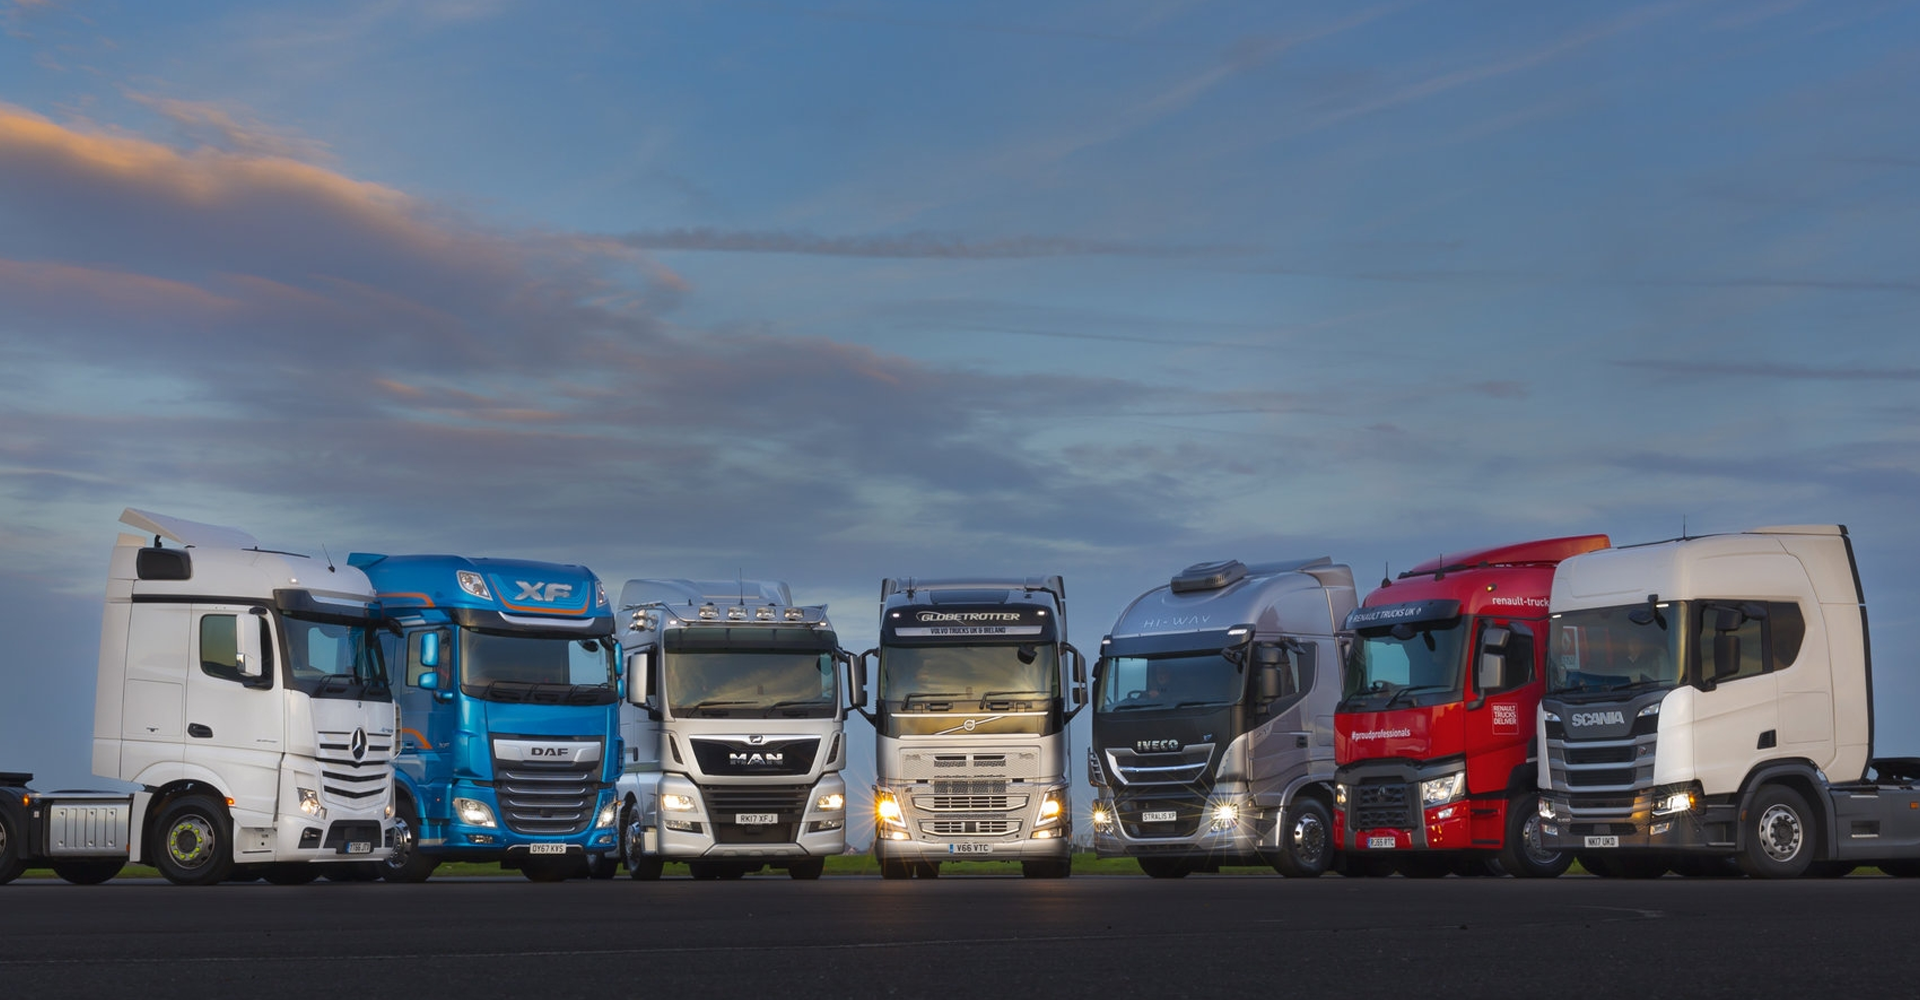 Seven Inspire E-SES lorries lined up in a slight curvature, with a cloudy sky behind them